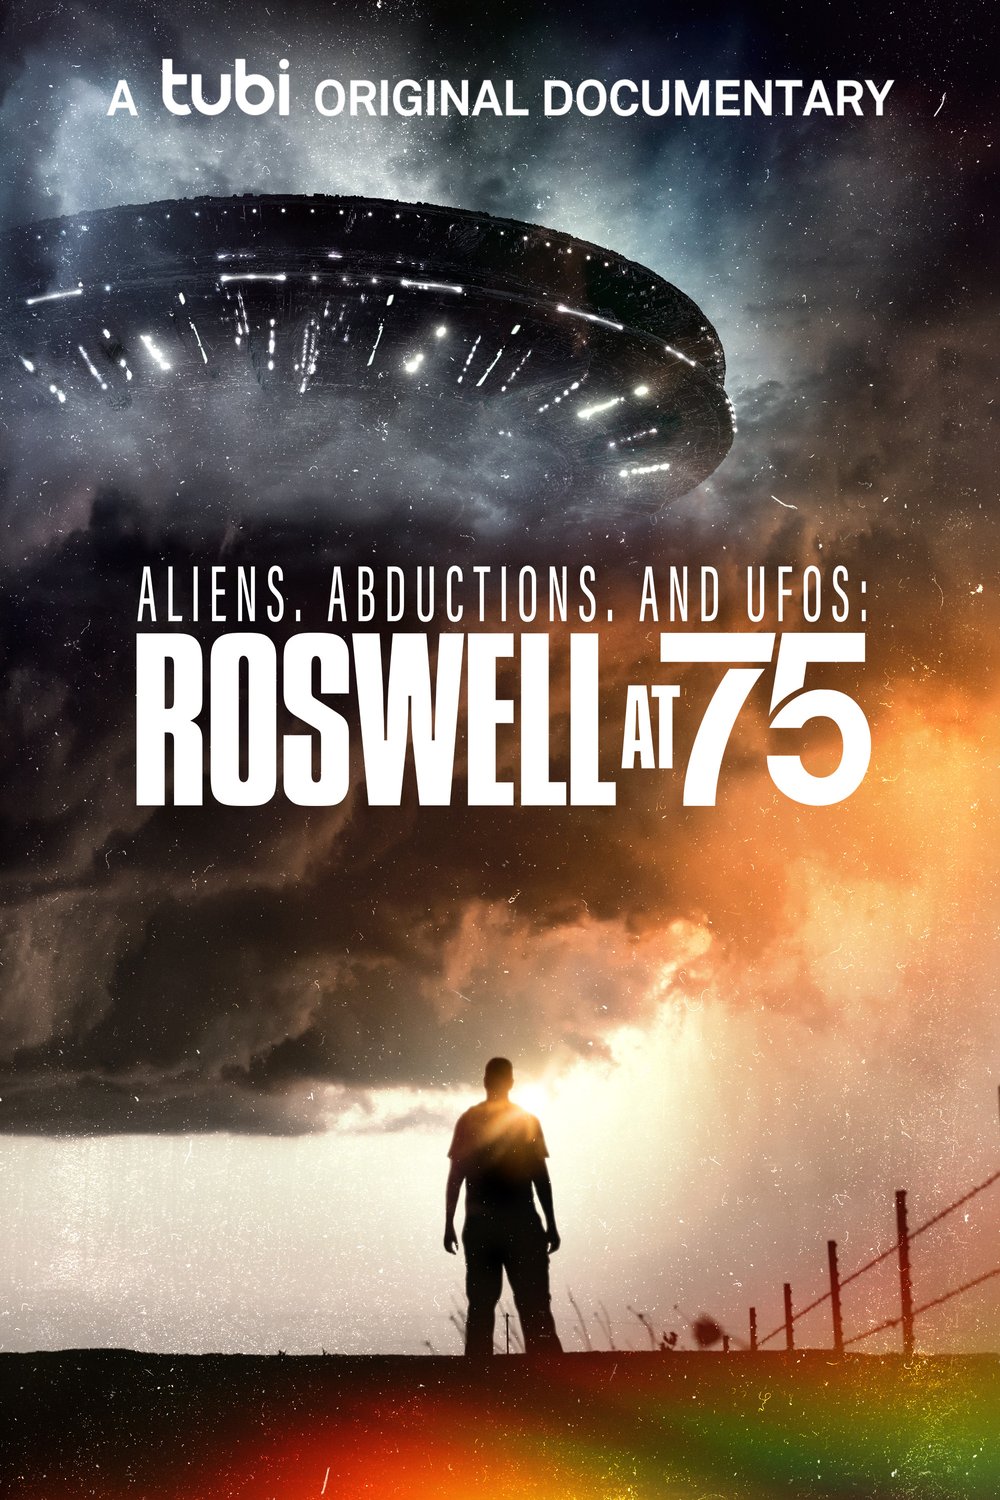 Poster of the movie Aliens, Abductions & UFOs: Roswell at 75